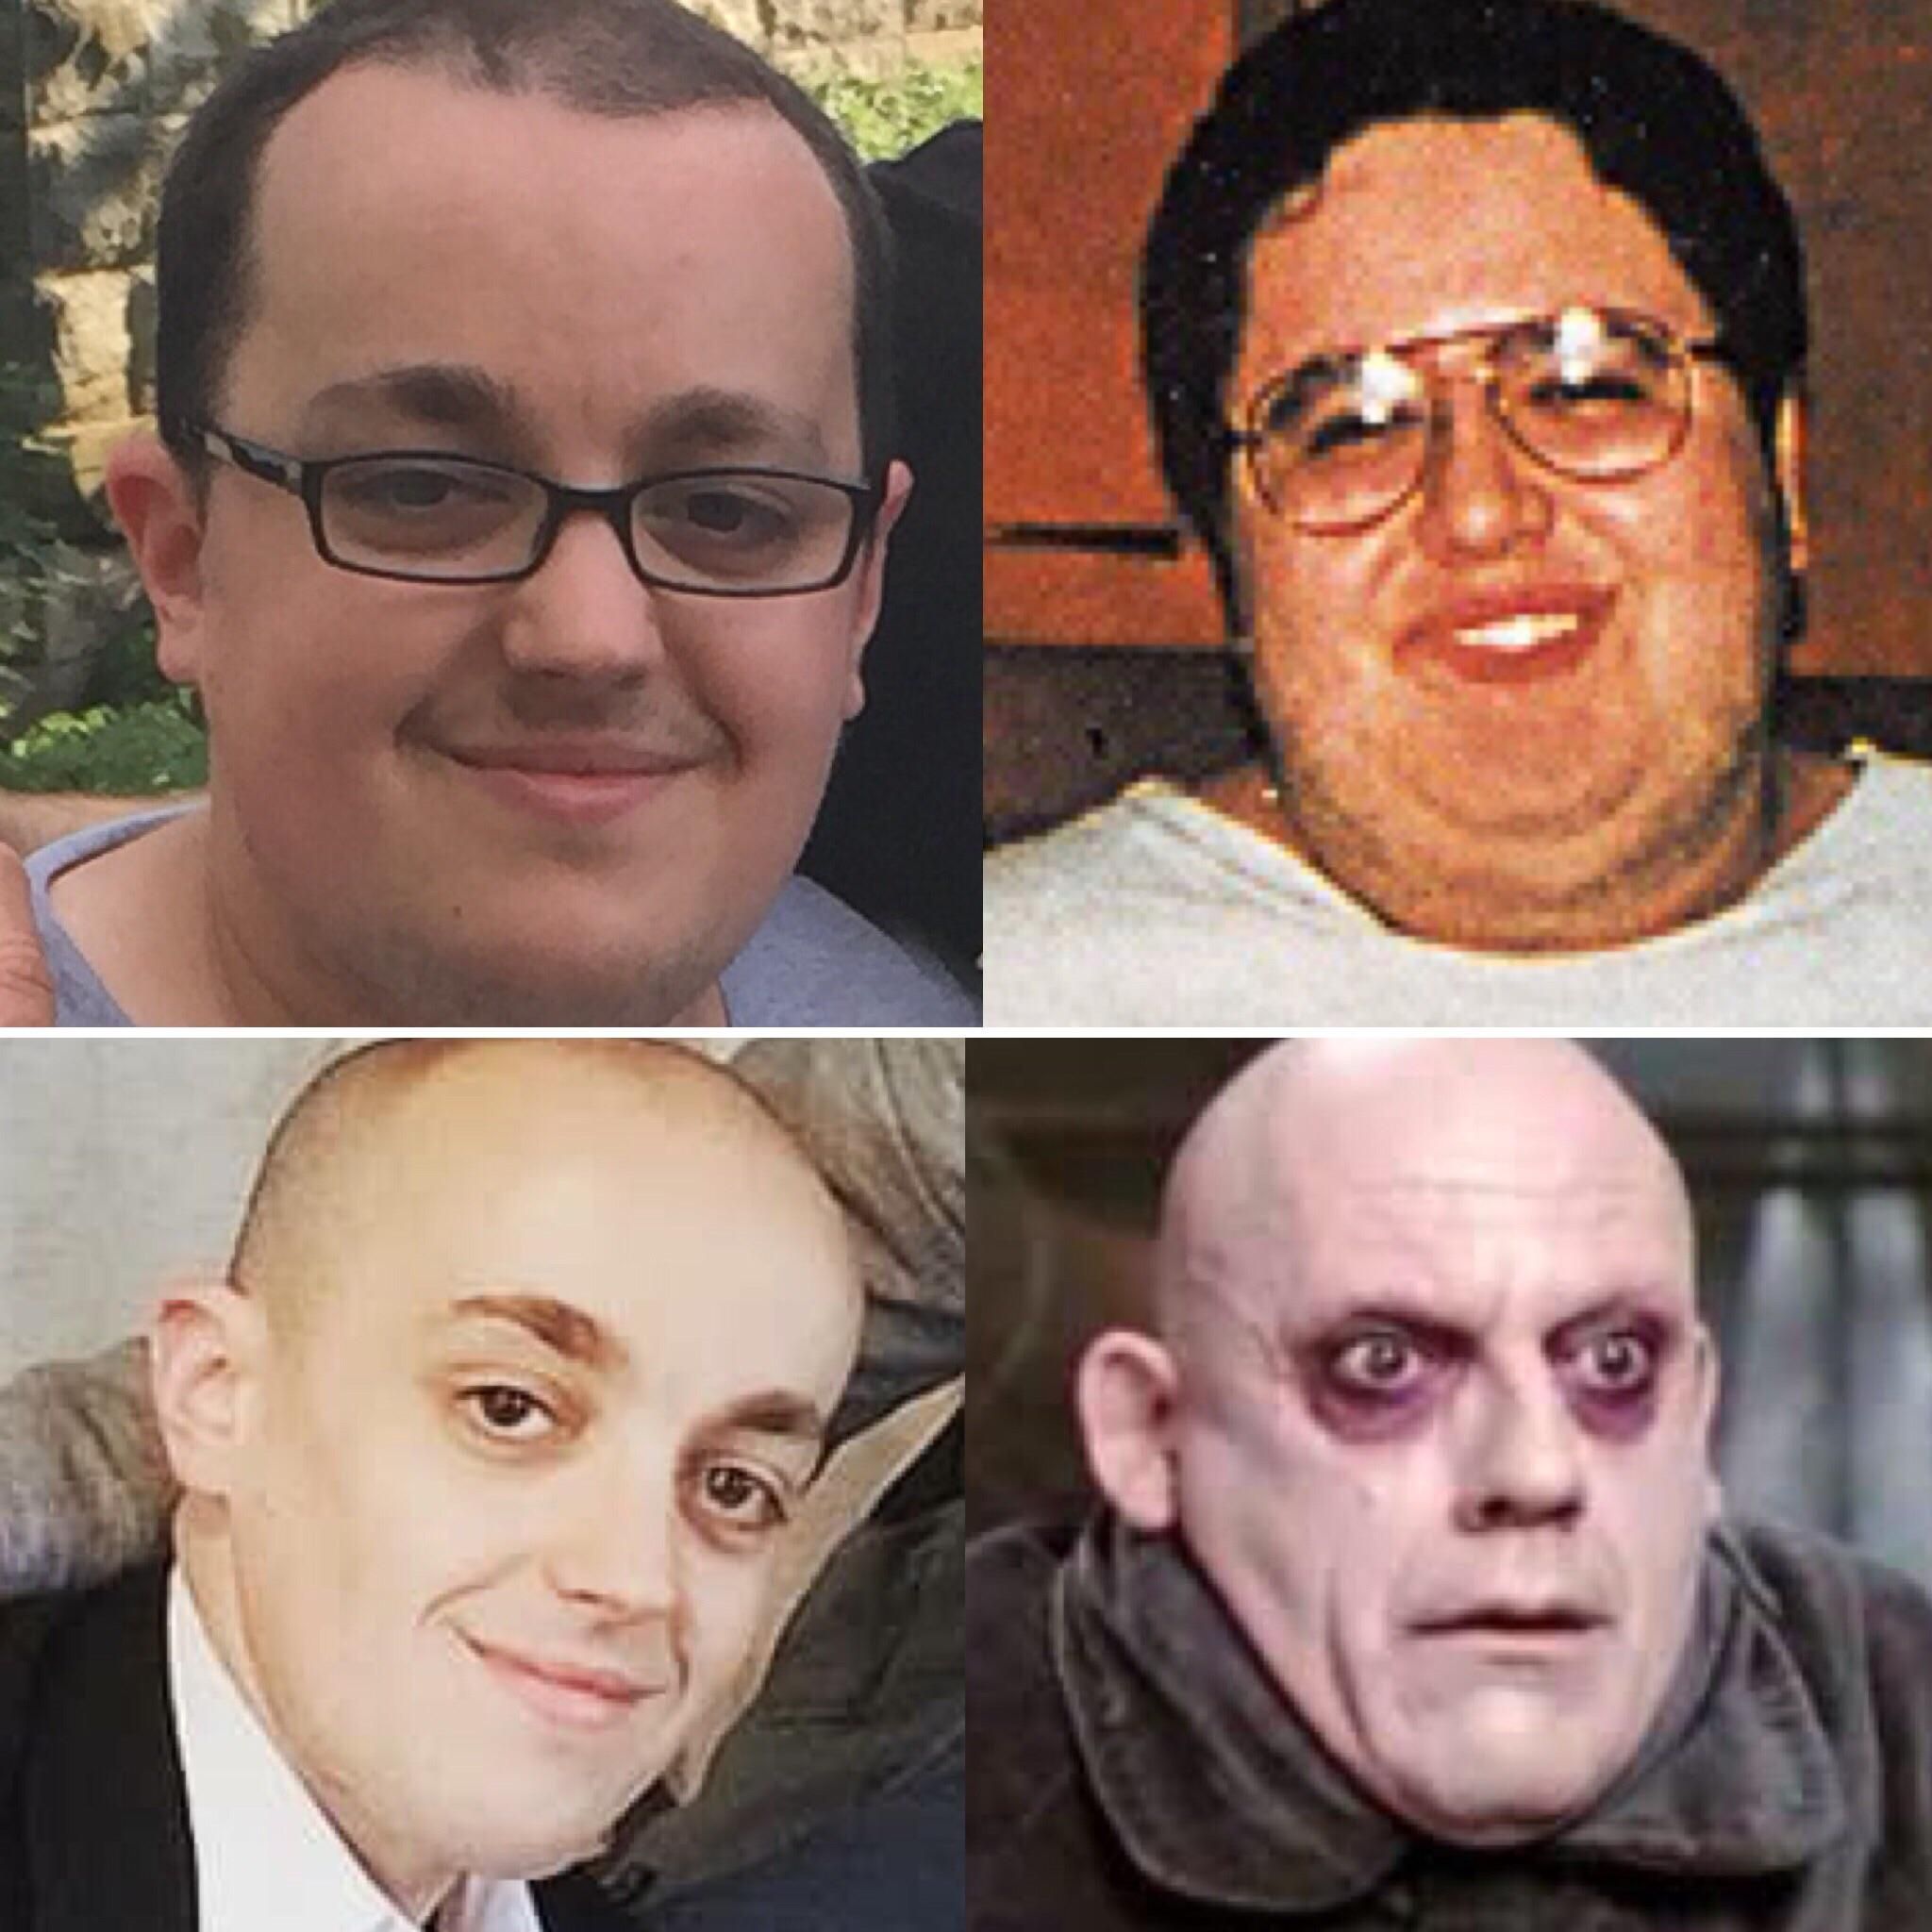 I was tired of being told I look like Jared Fogle so I lost 100lbs to look better...didn’t work.